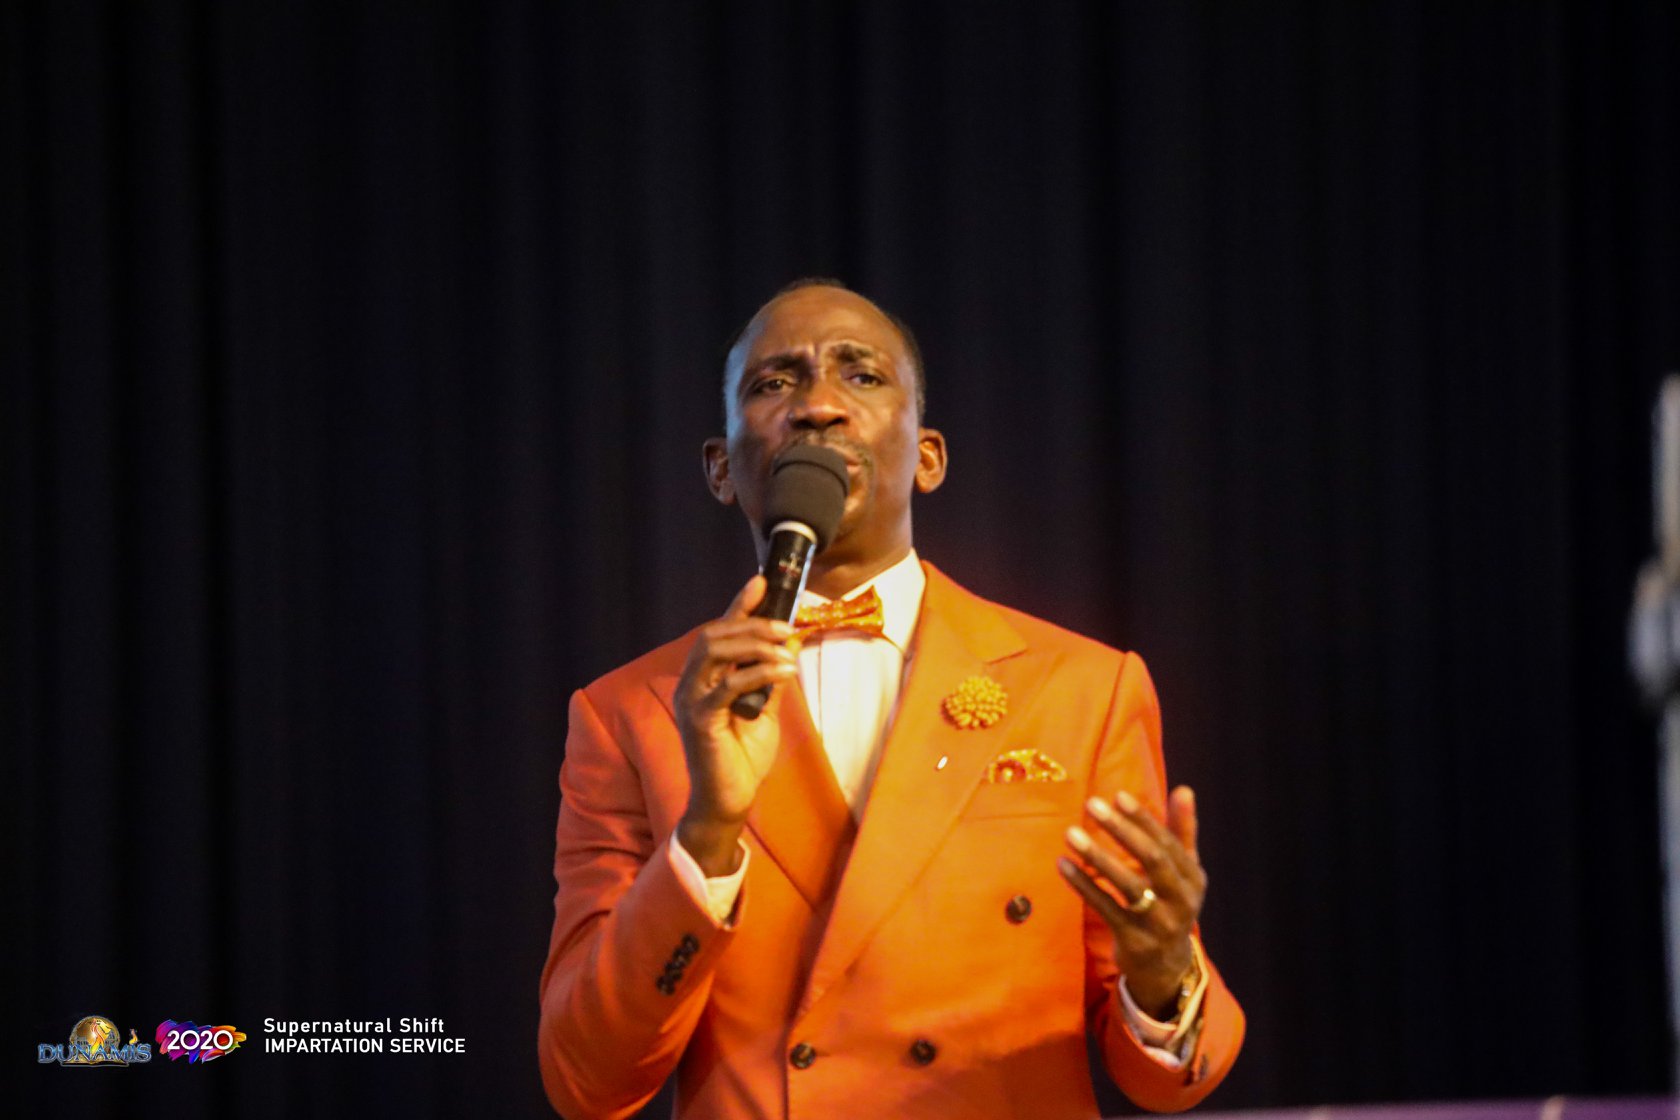 Dr. Paul Enenche - What Did I Do [Day by Day] mp3